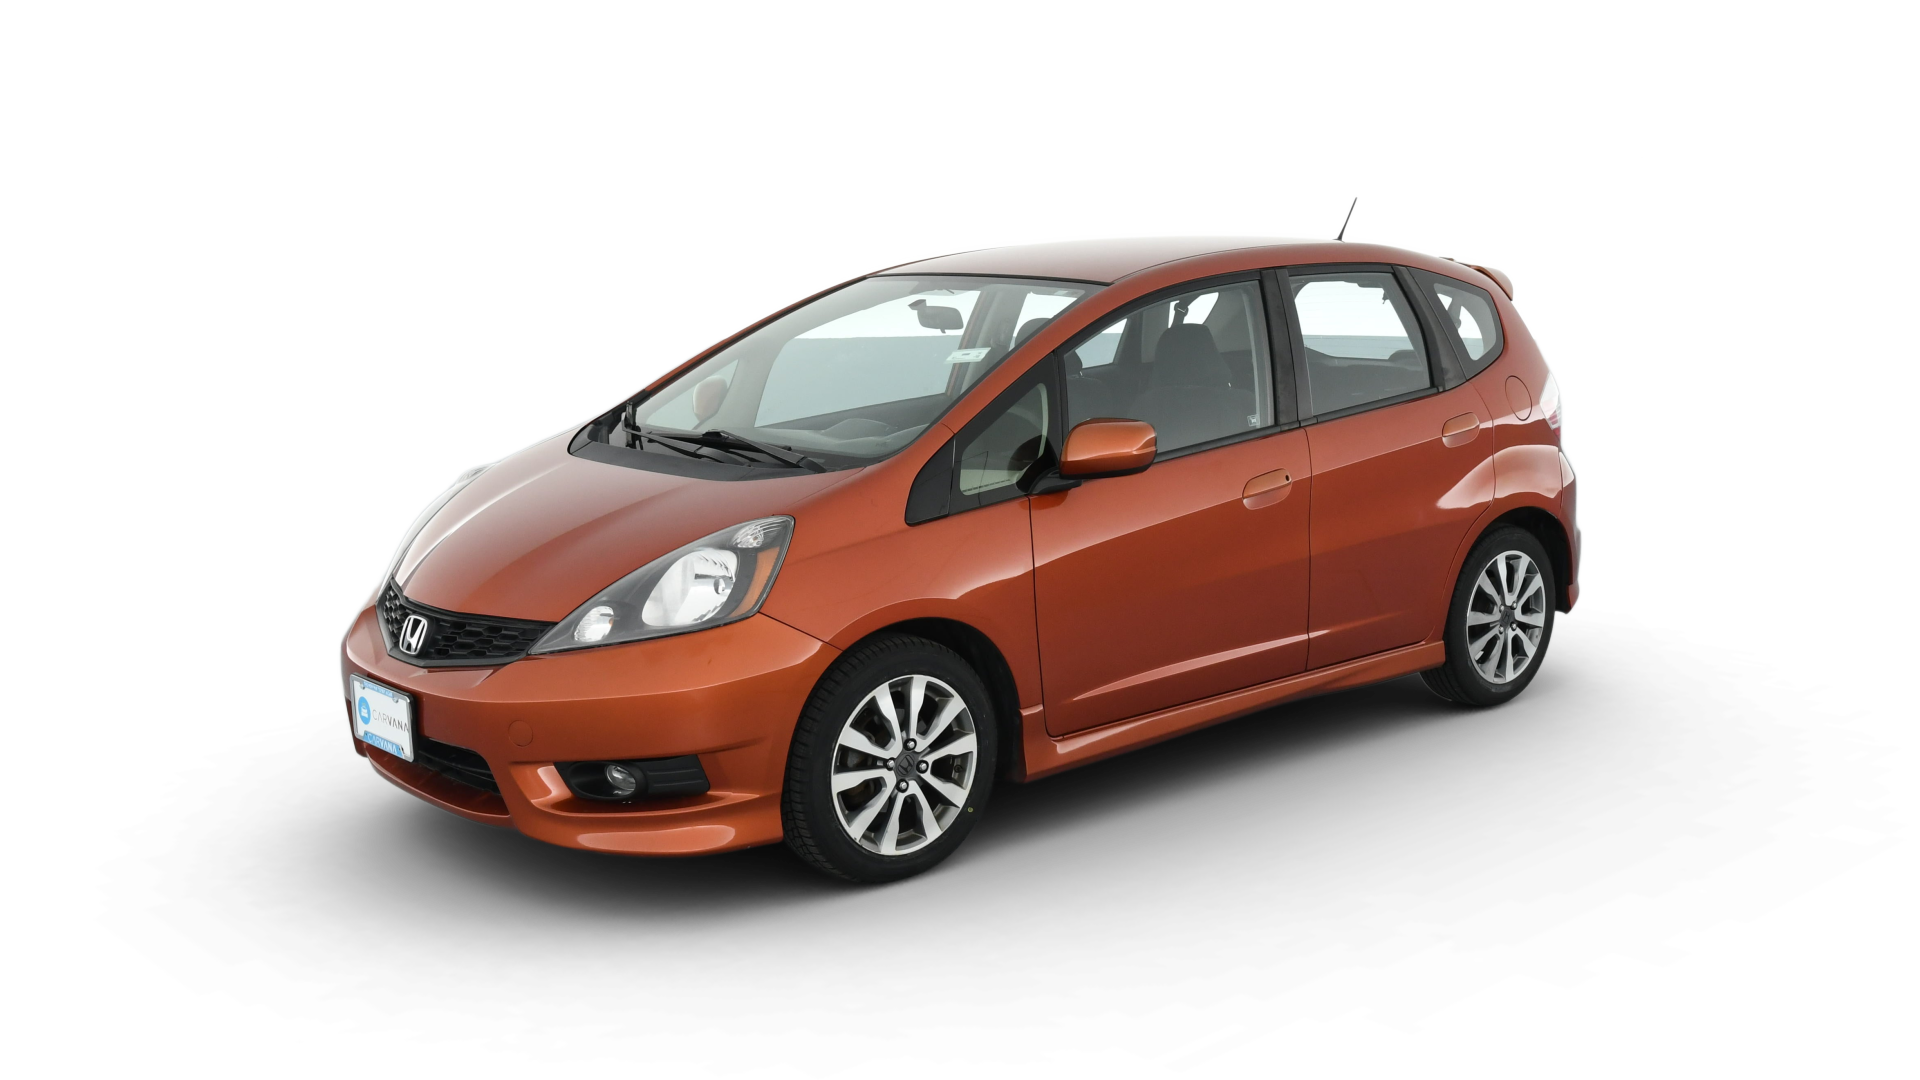 Used Honda Fit For Sale Online | Carvana